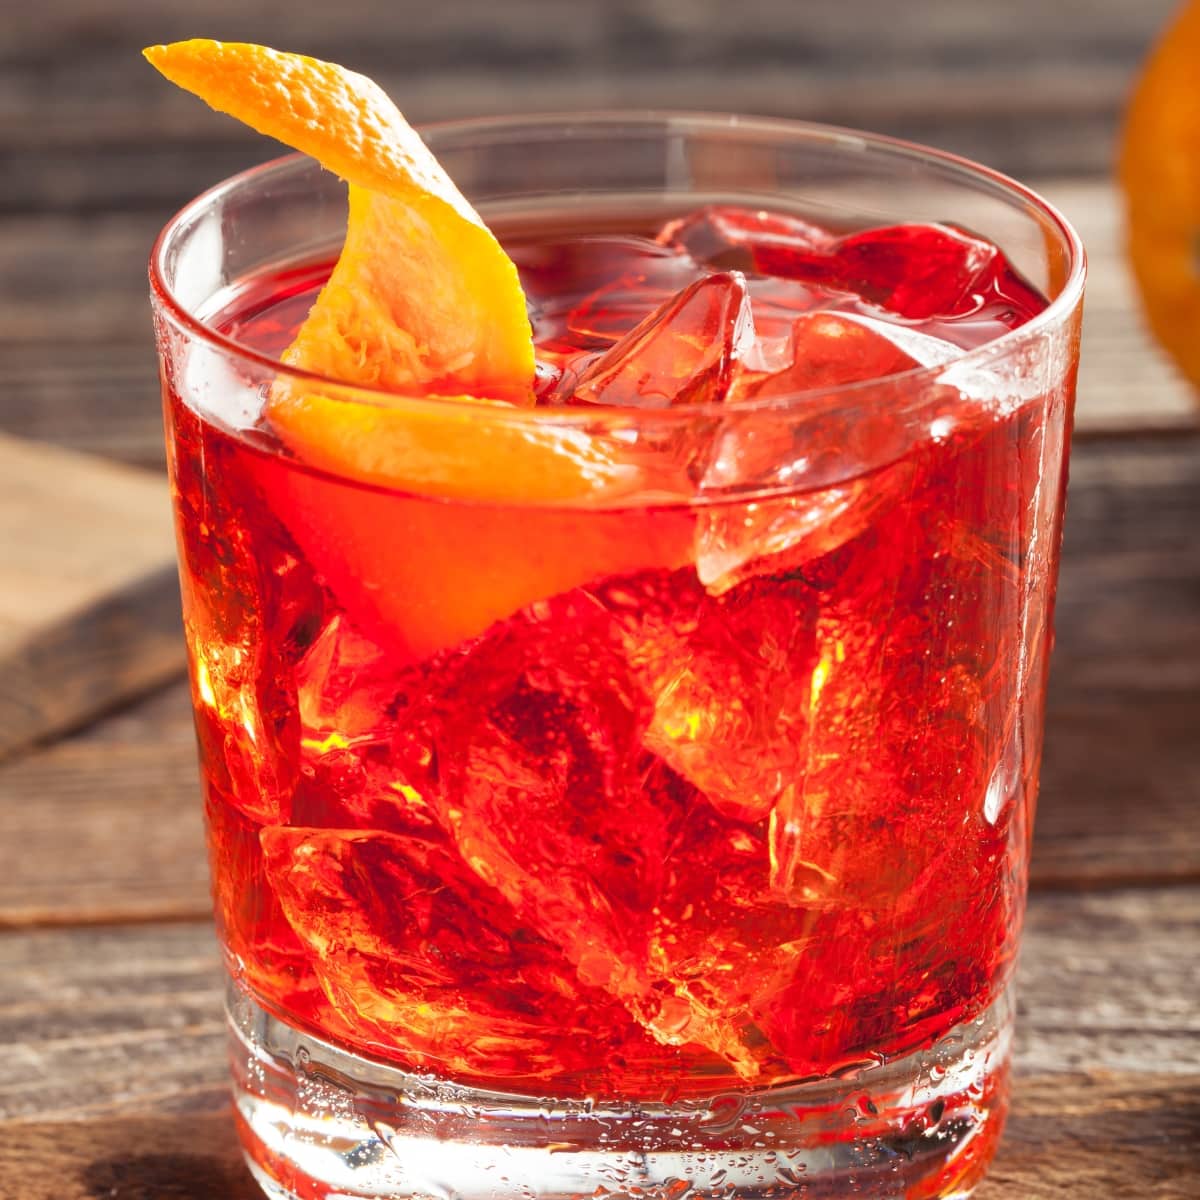 Ice Cold Glass of Refreshing and Boozy Negroni Cocktail